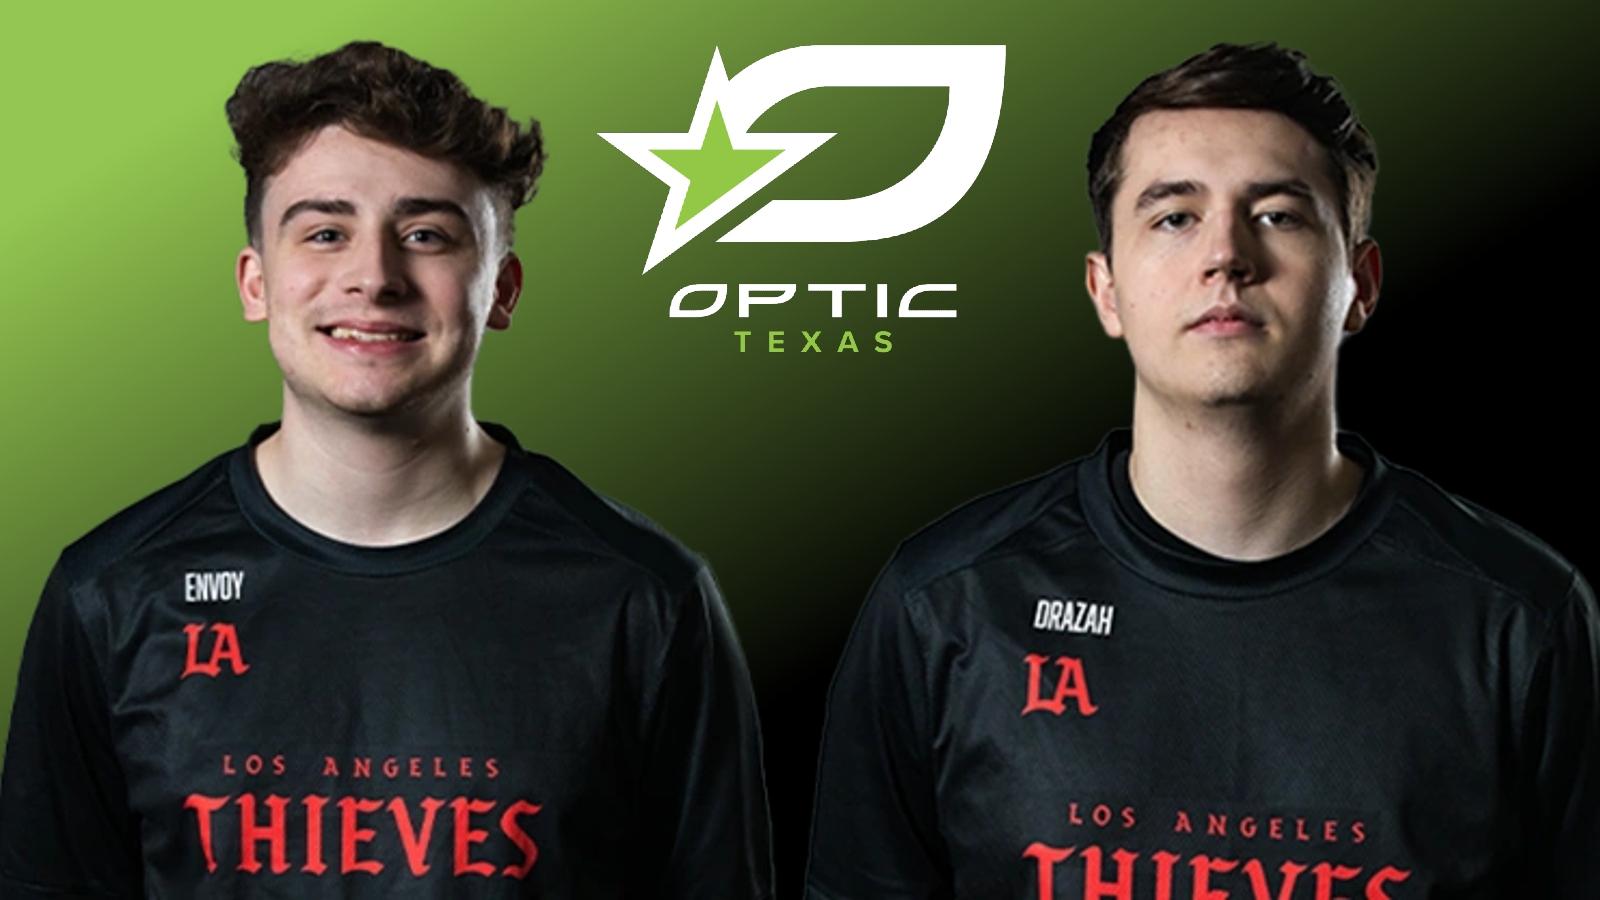 envoy and drazah in la thieves jerseys with optic texas background